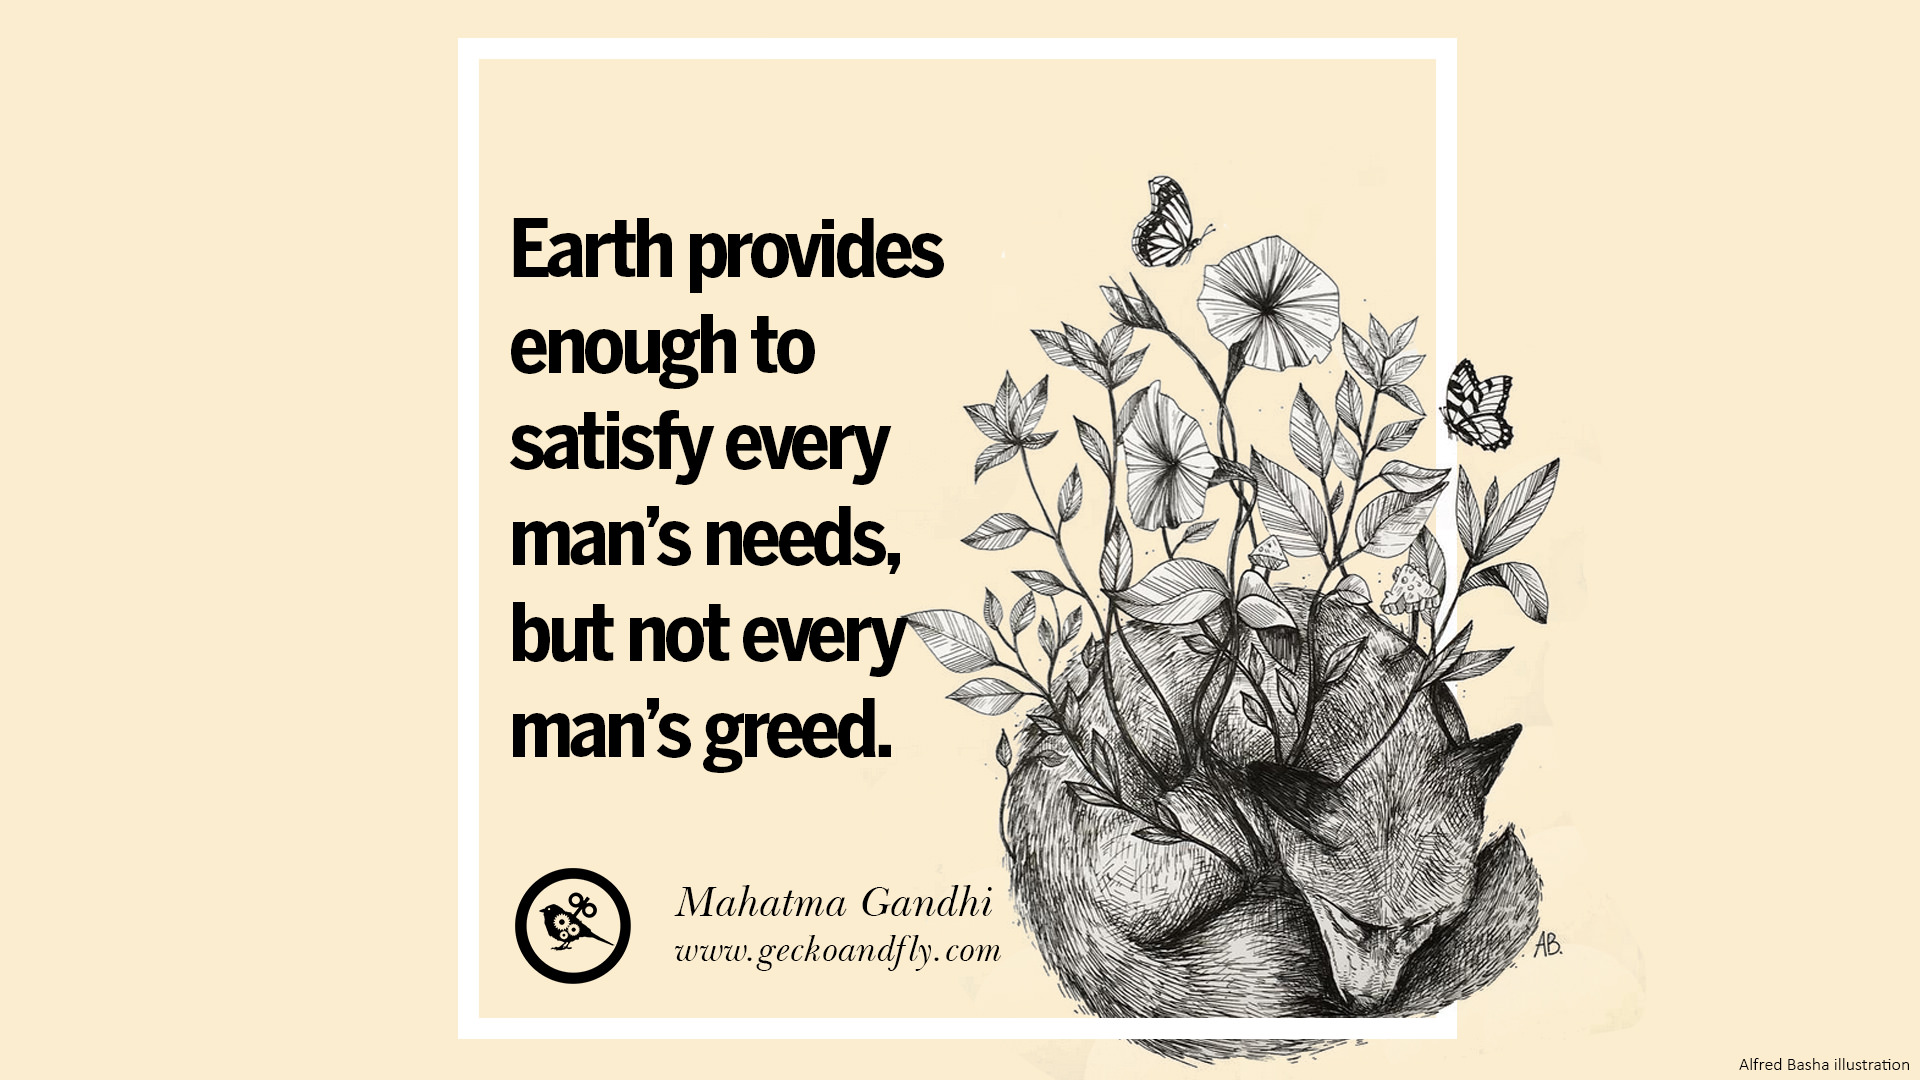 Earth provides enough to satisfy every man's needs, but not every man's greed. Mahatma Gandhi